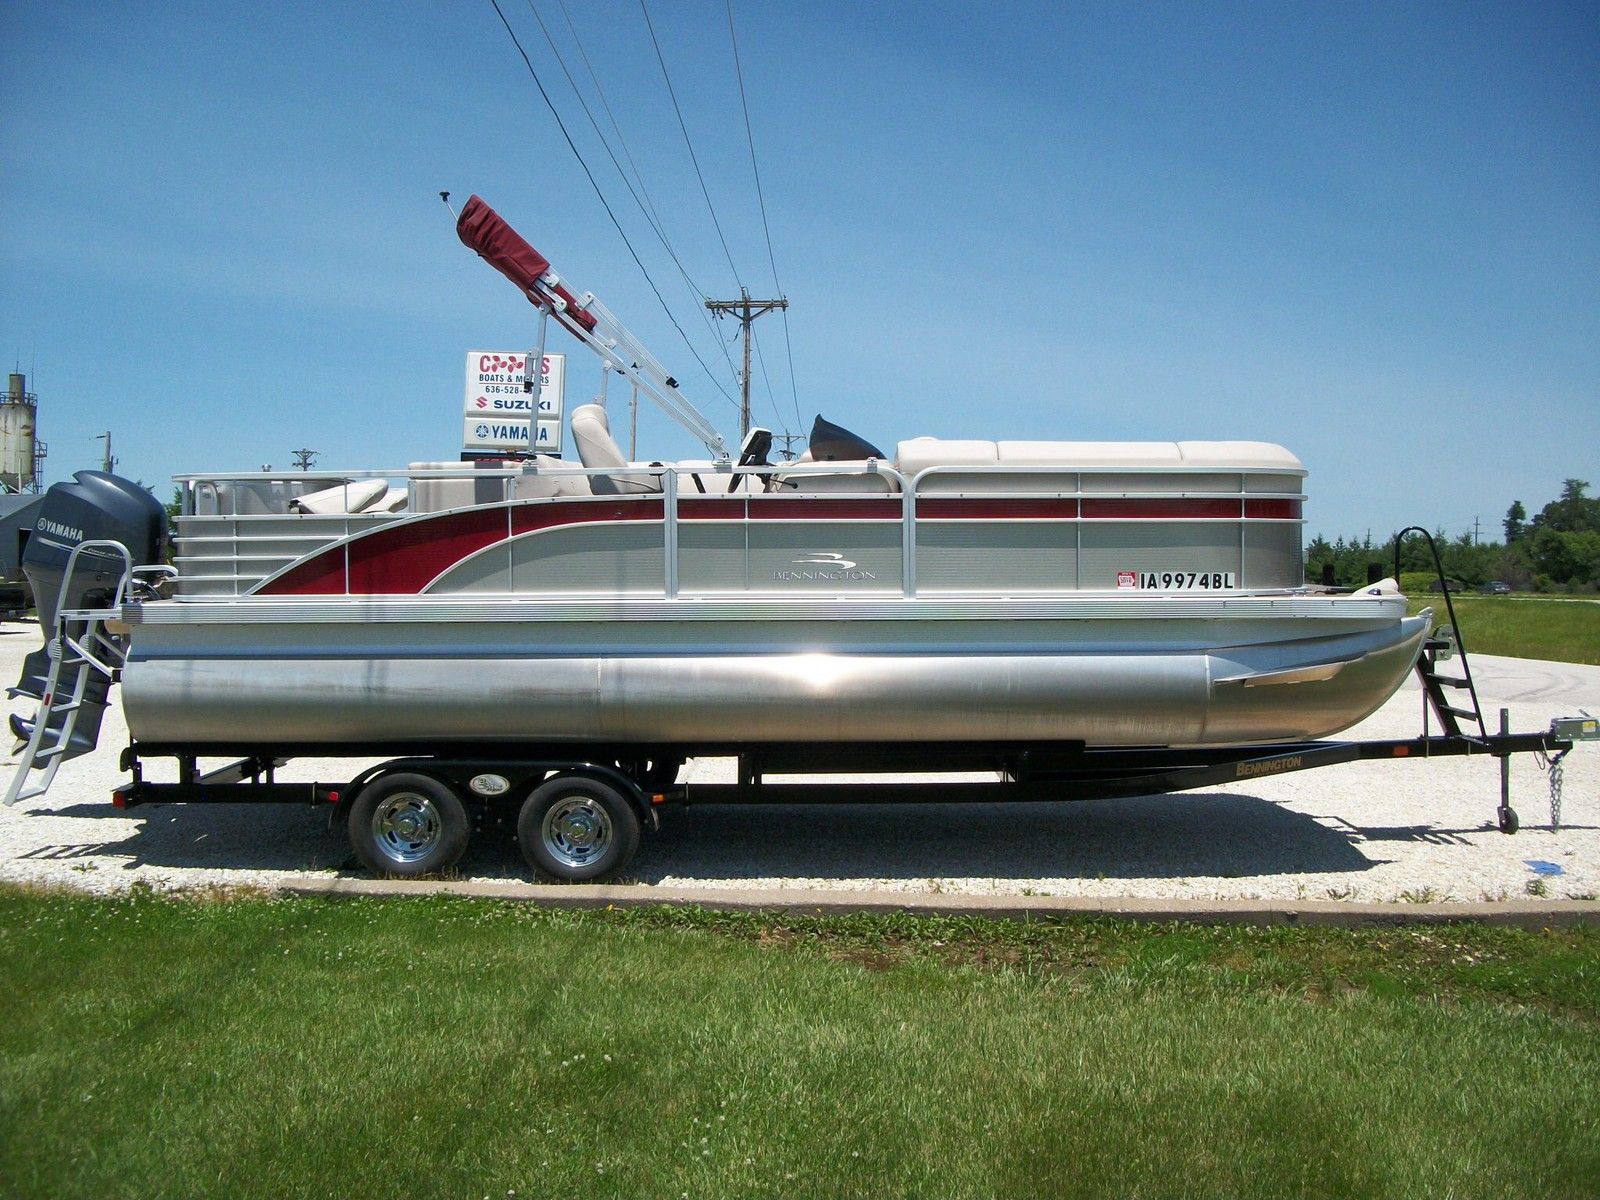 Bennington 2275 GS 2013 for sale for $38,900 - Boats-from ...